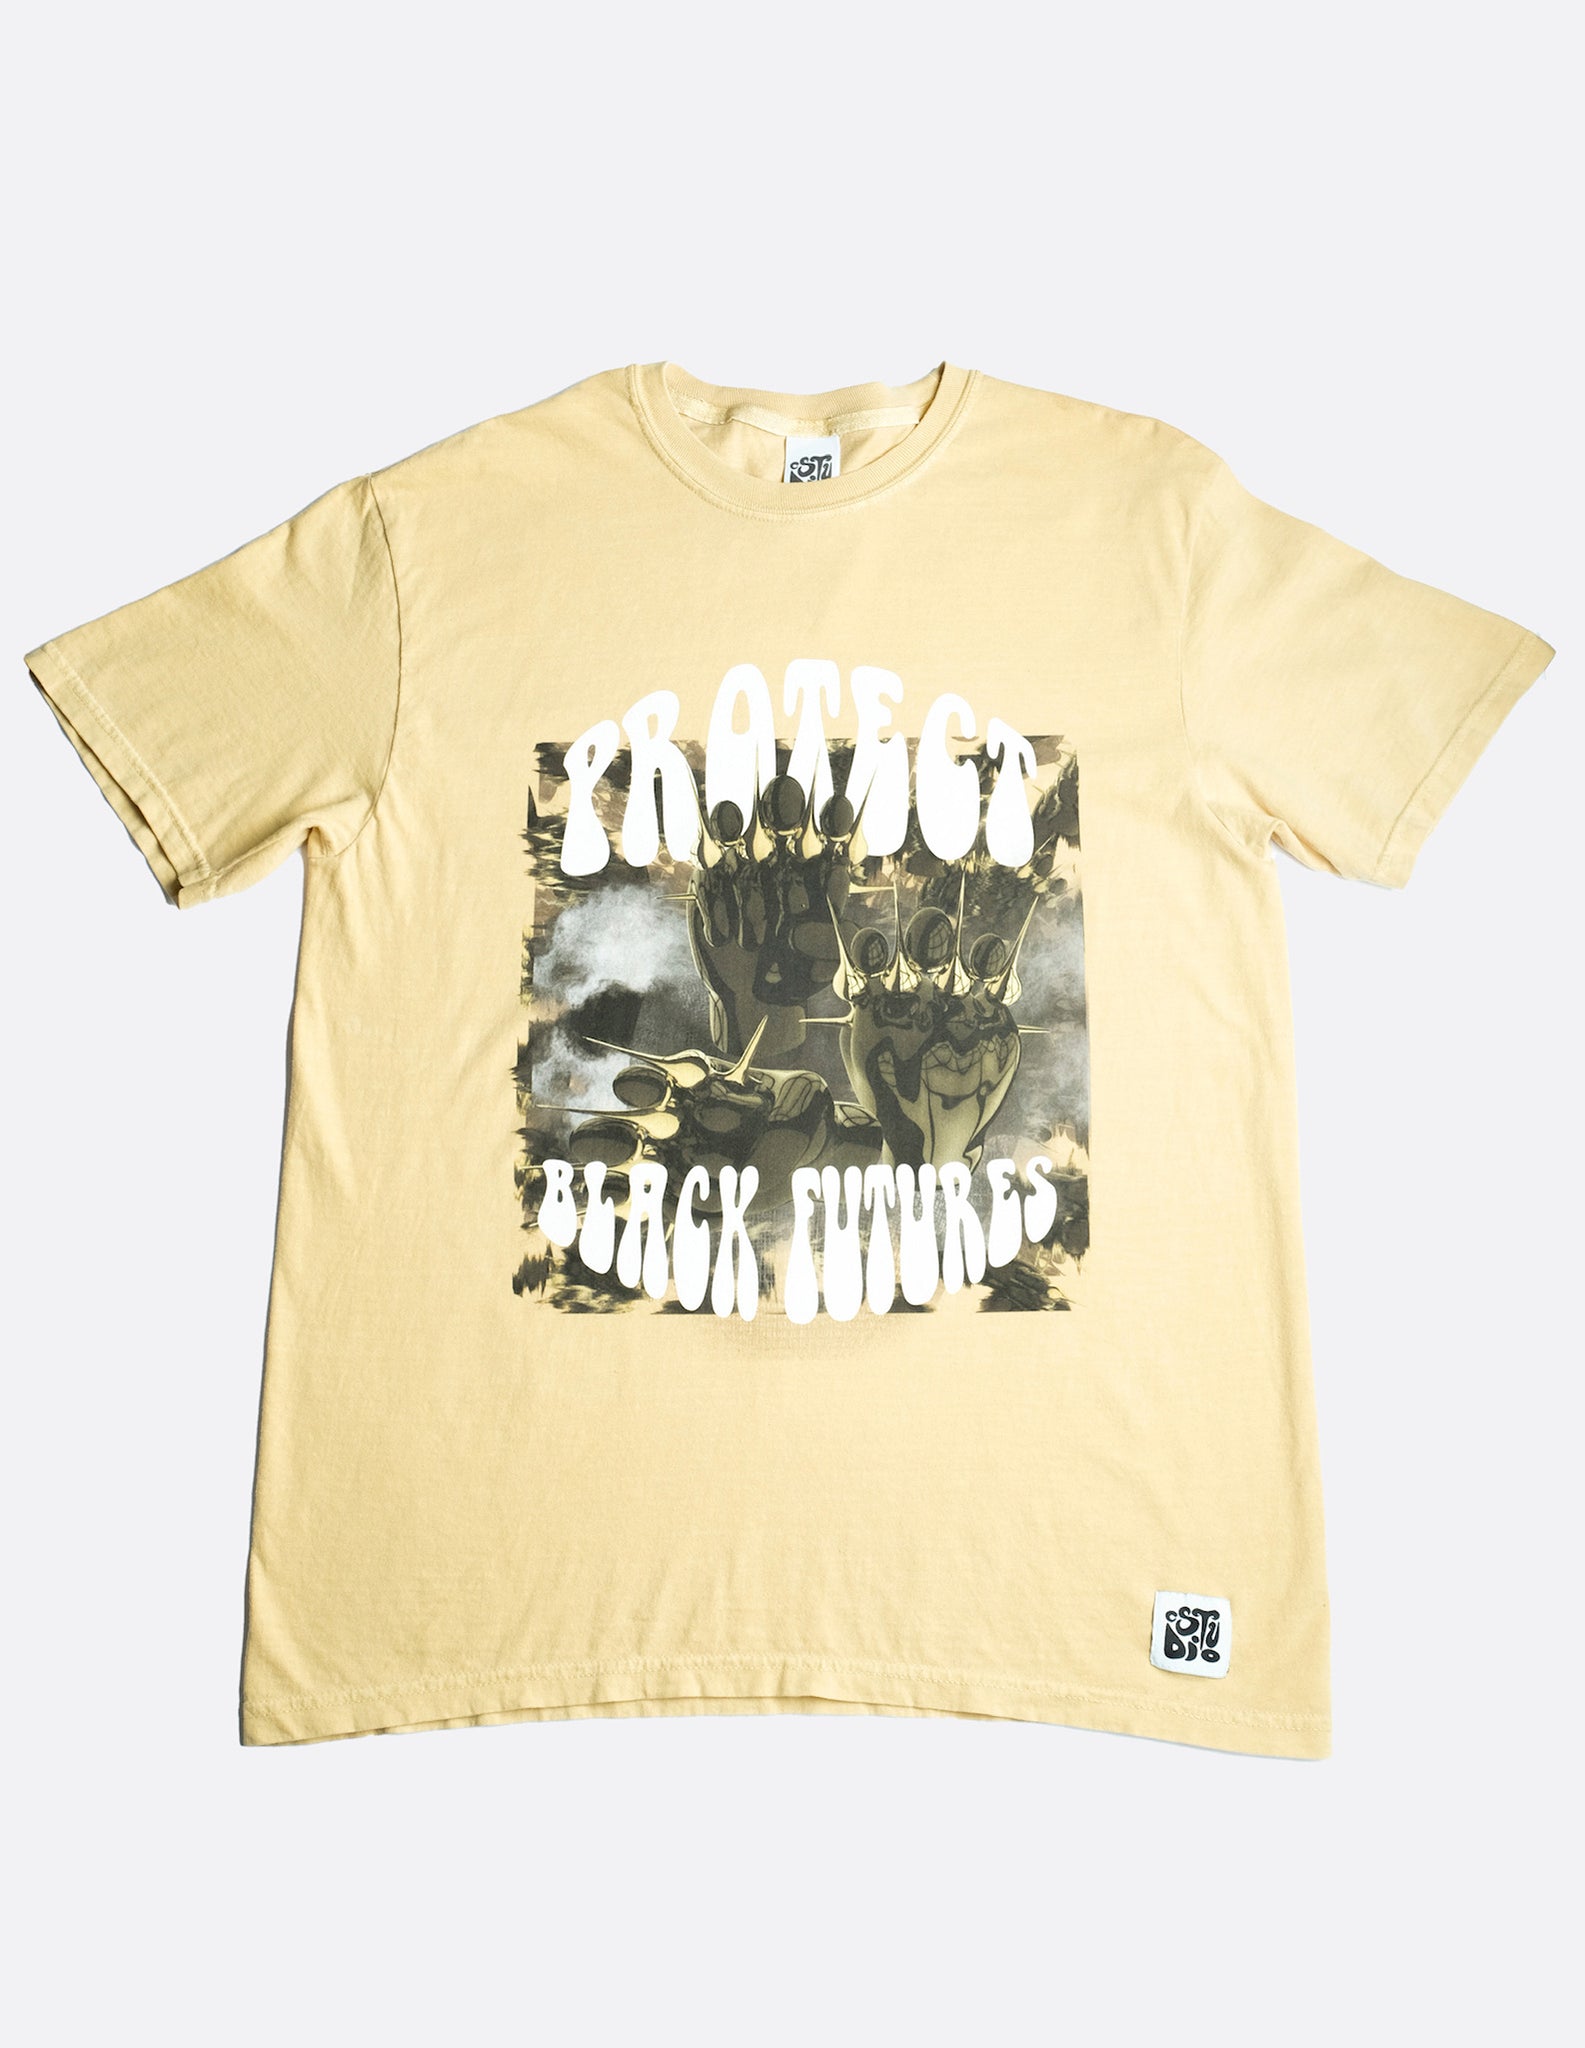 Edition of 20: Protect Black Futures Tee — Mustard Seed